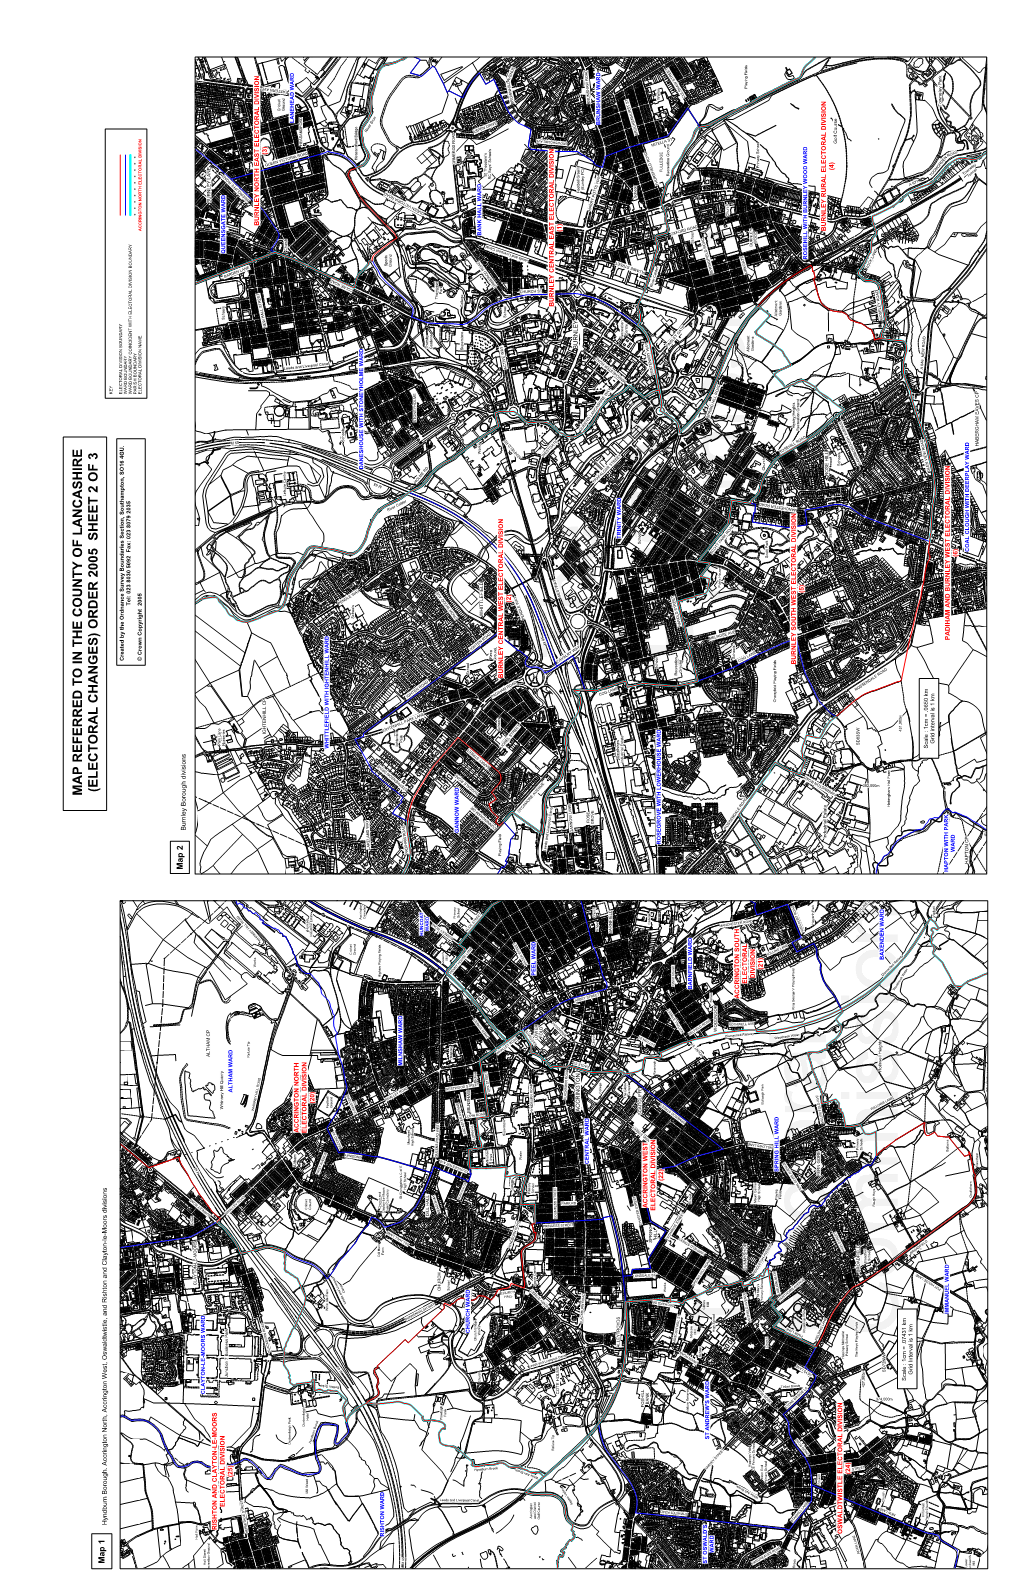 MAP REFERRED to in the COUNTY of LANCASHIRE (ELECTORAL CHANGES) ORDER 2005 SHEET 2 of 3 Map 1 Hyndburn Borough